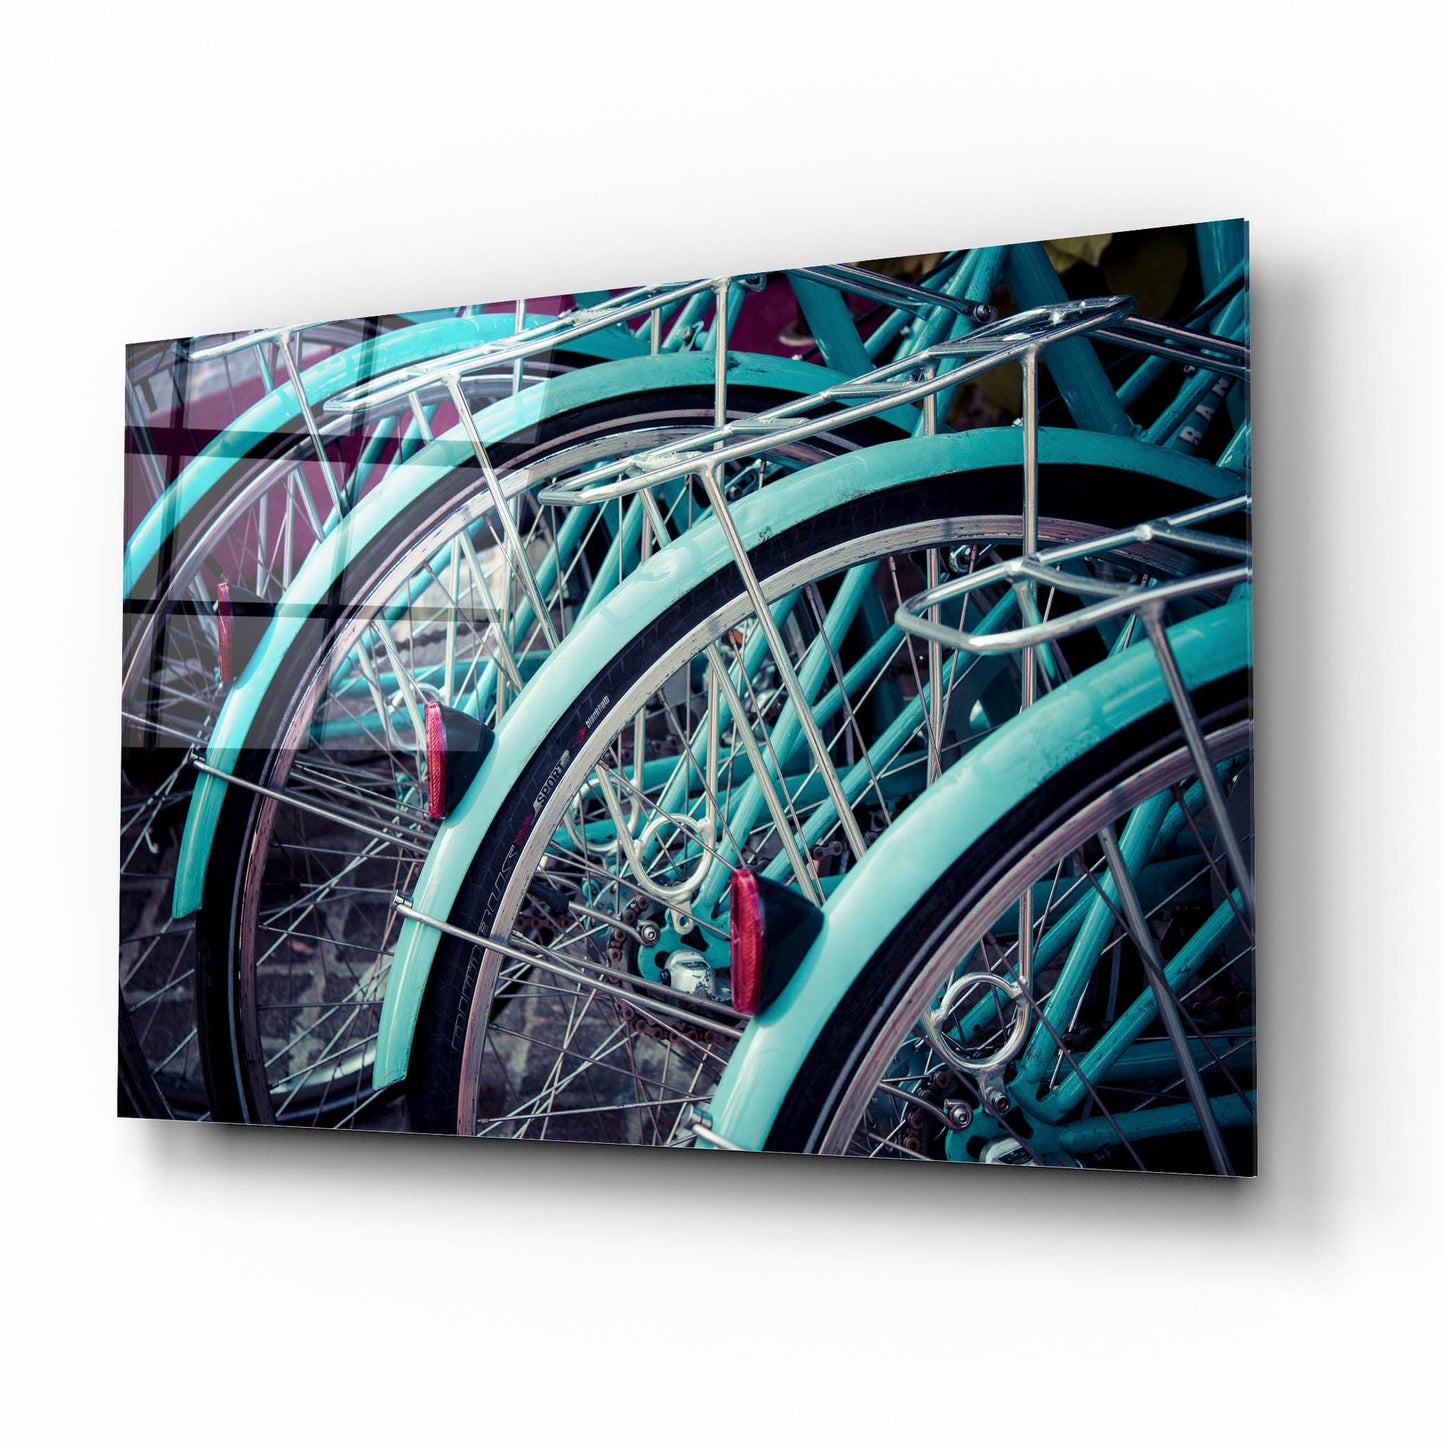 Epic Art ' Bicycle Line Up 2' by Jessica Reiss, Acrylic Glass Wall Art,16x12